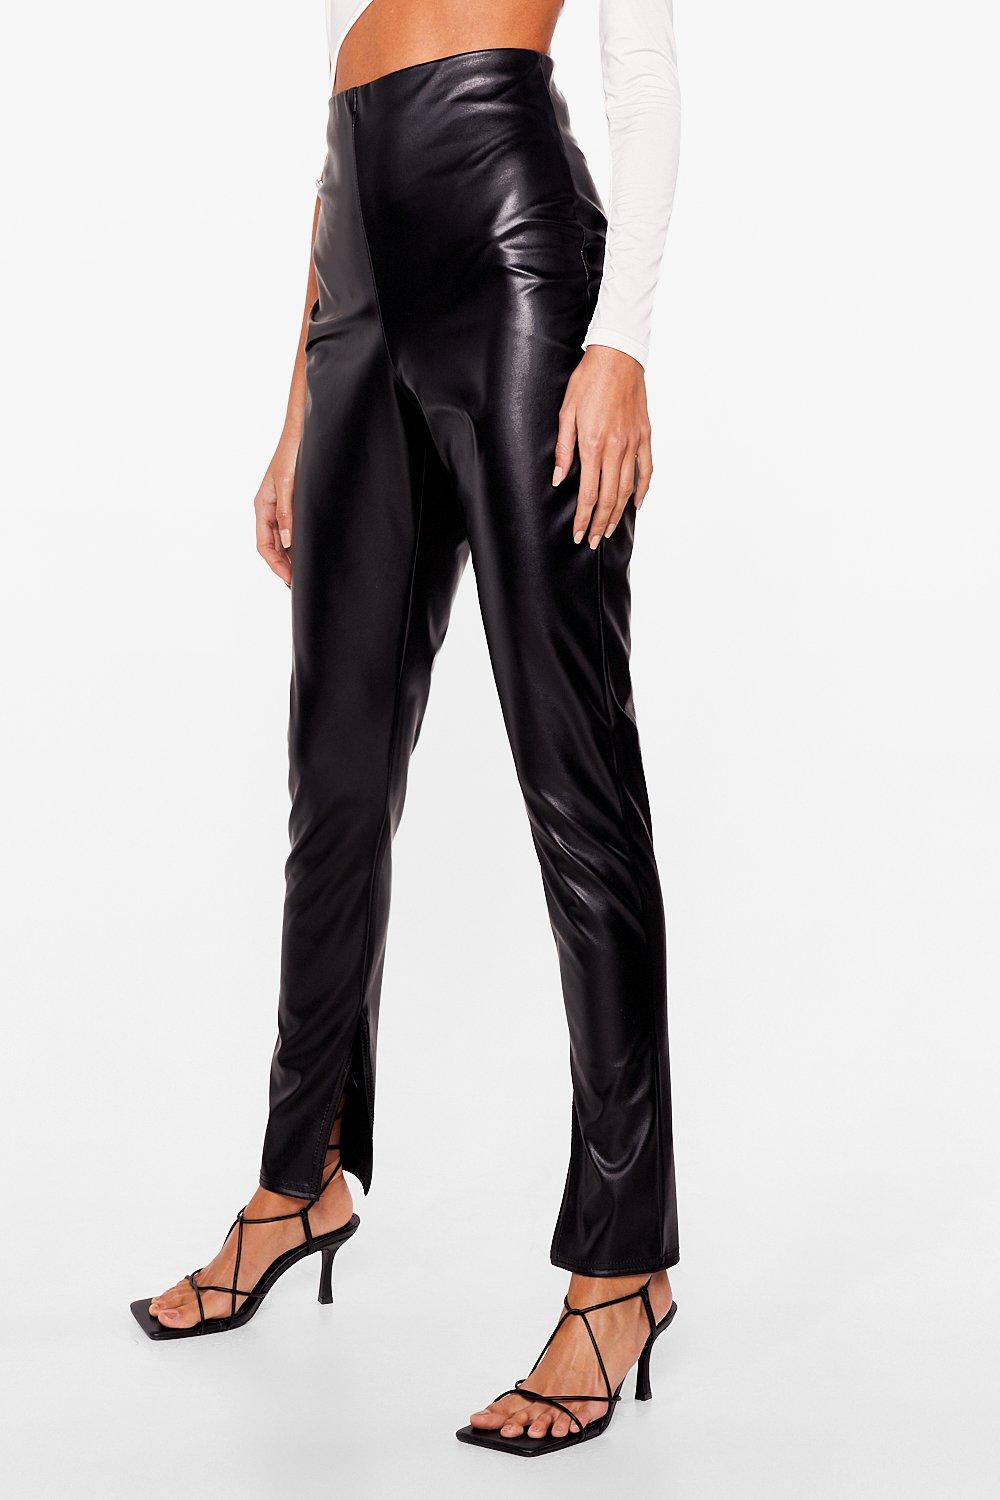 Black Faux Leather Pants by Saunders Collective for $55